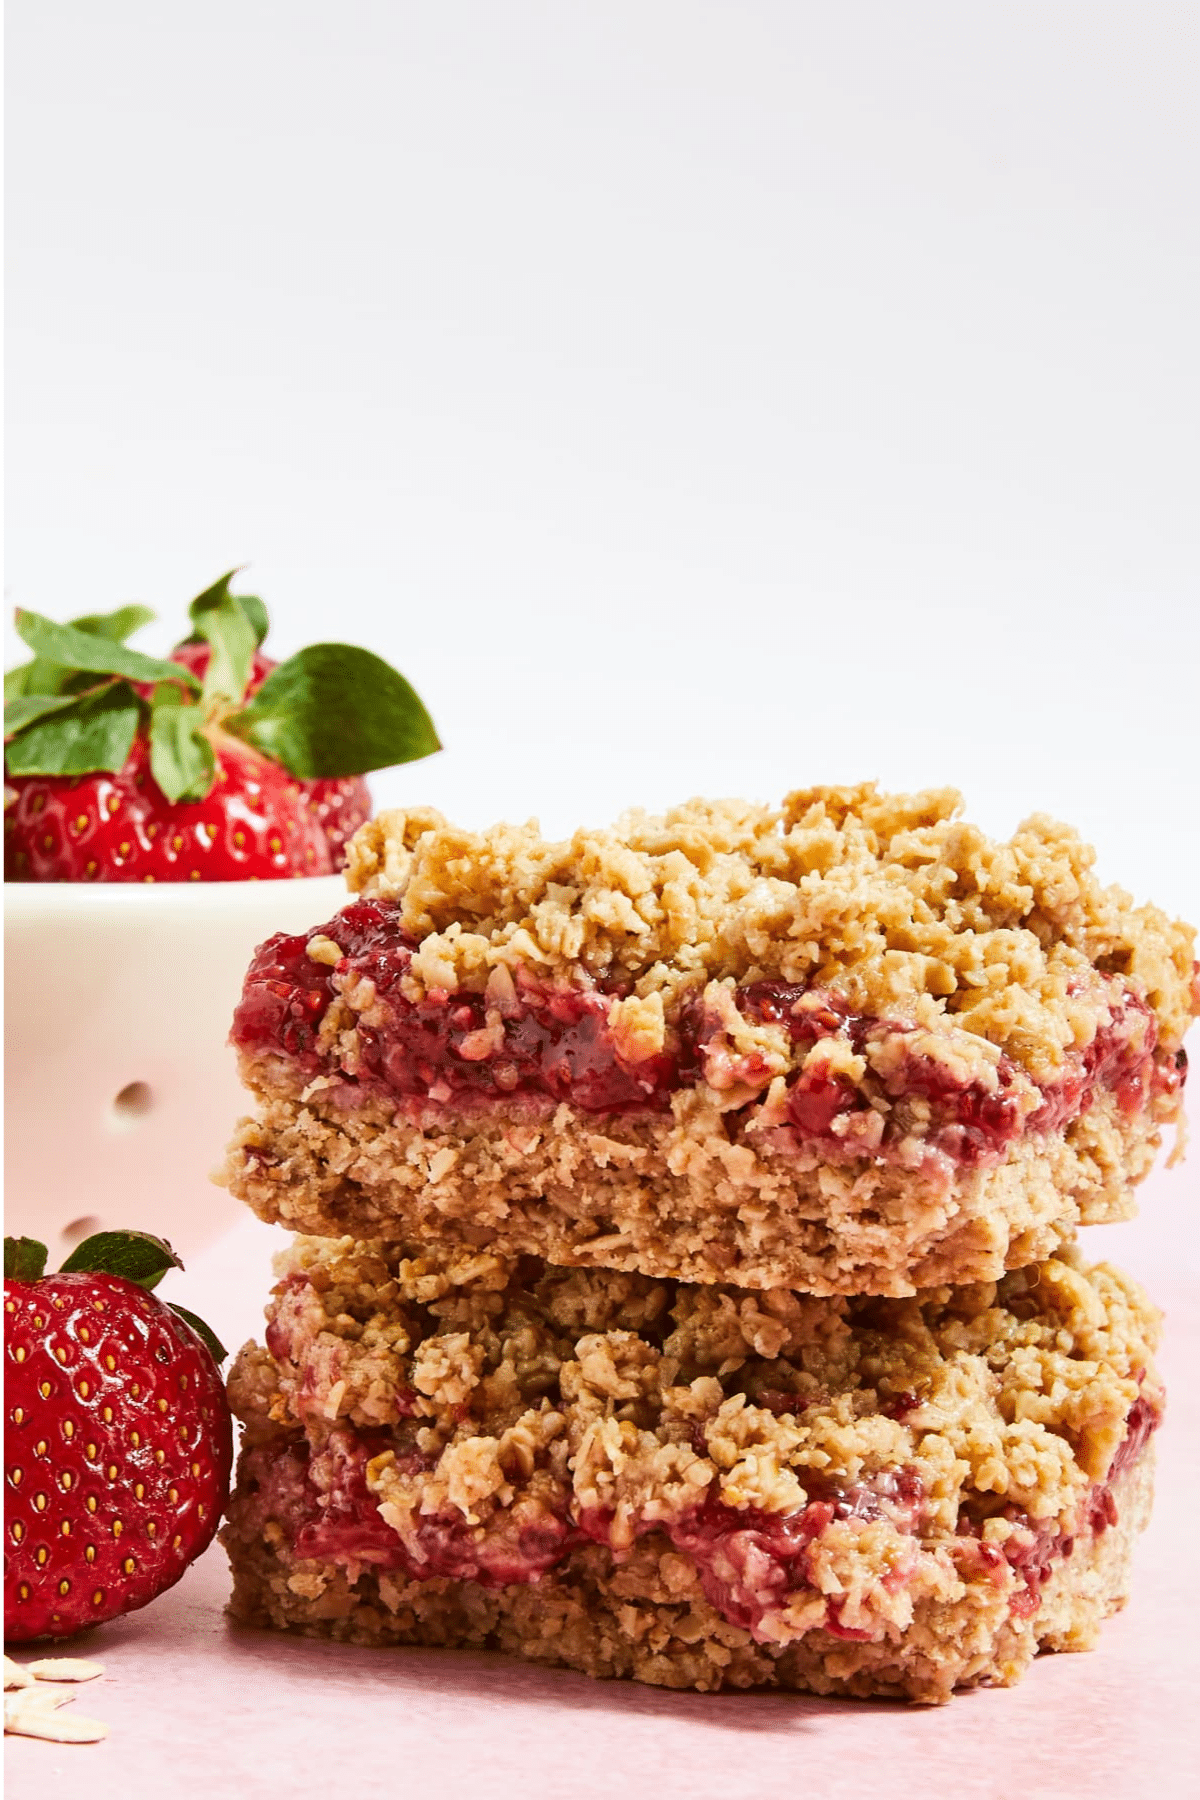 Strawberry Crumble Bars stacked on each other with strawberry.